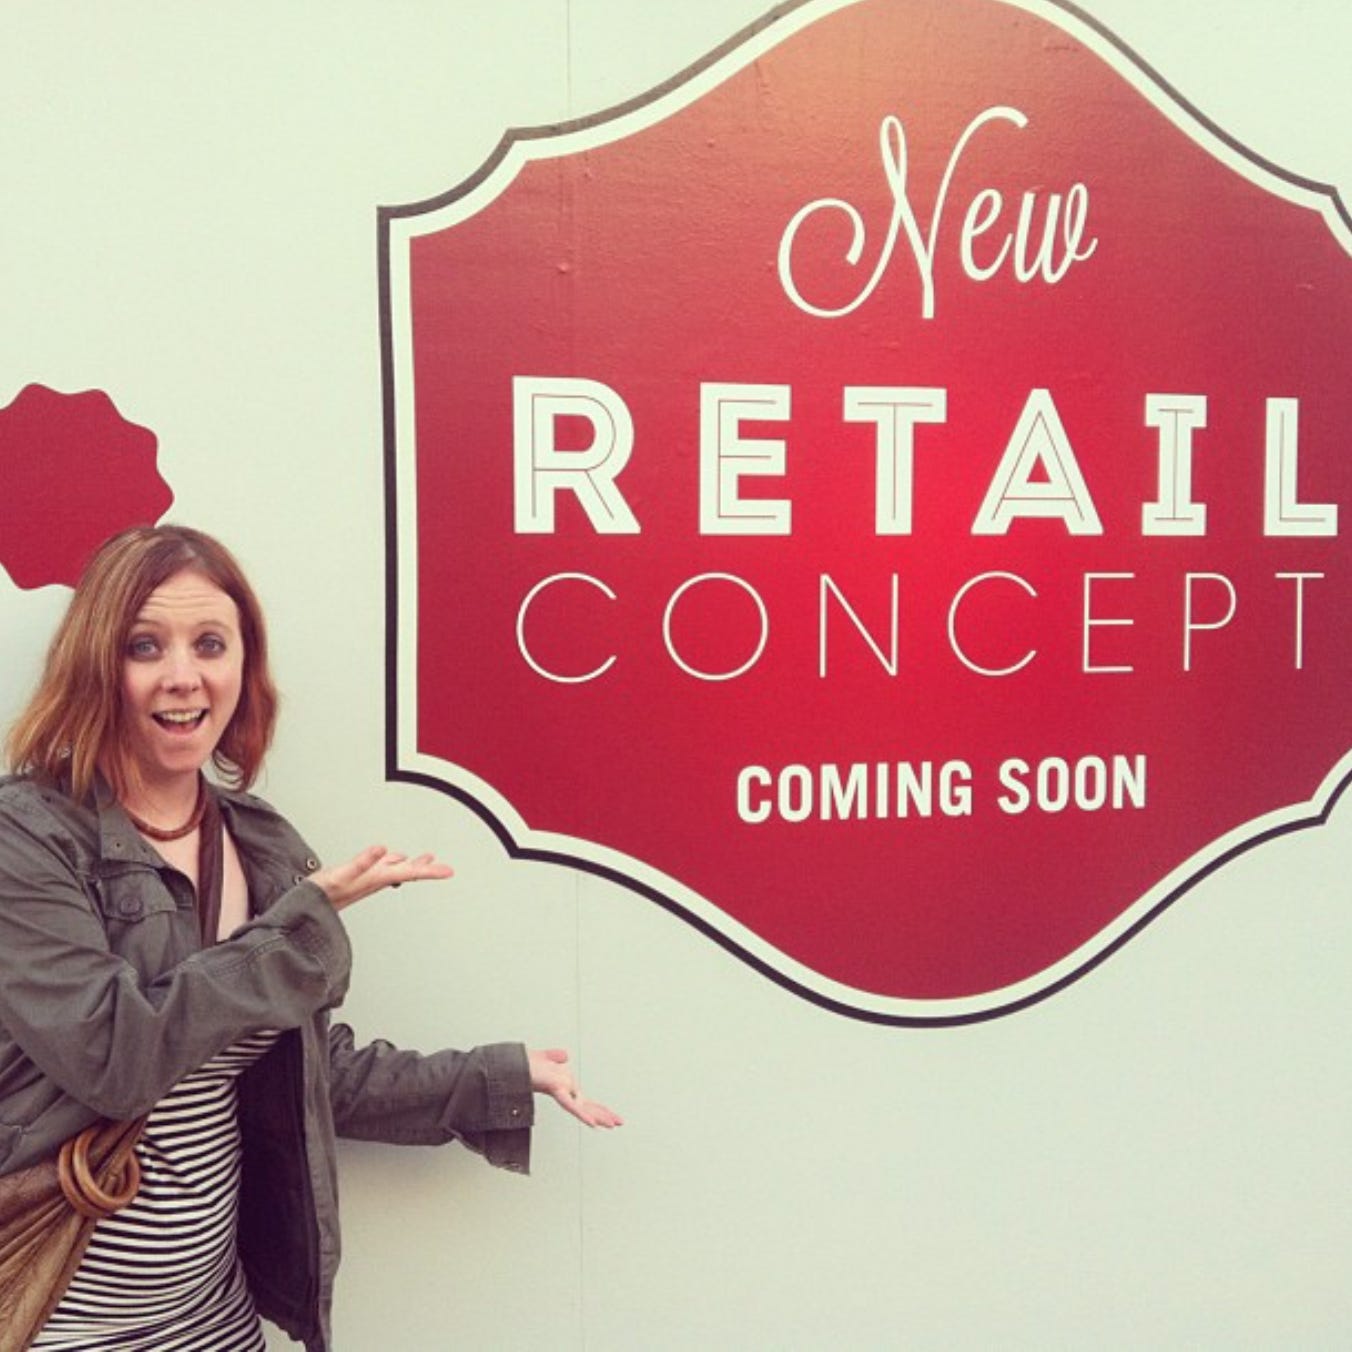 woman standing in front of a sign that says "new retail concept coming soon"